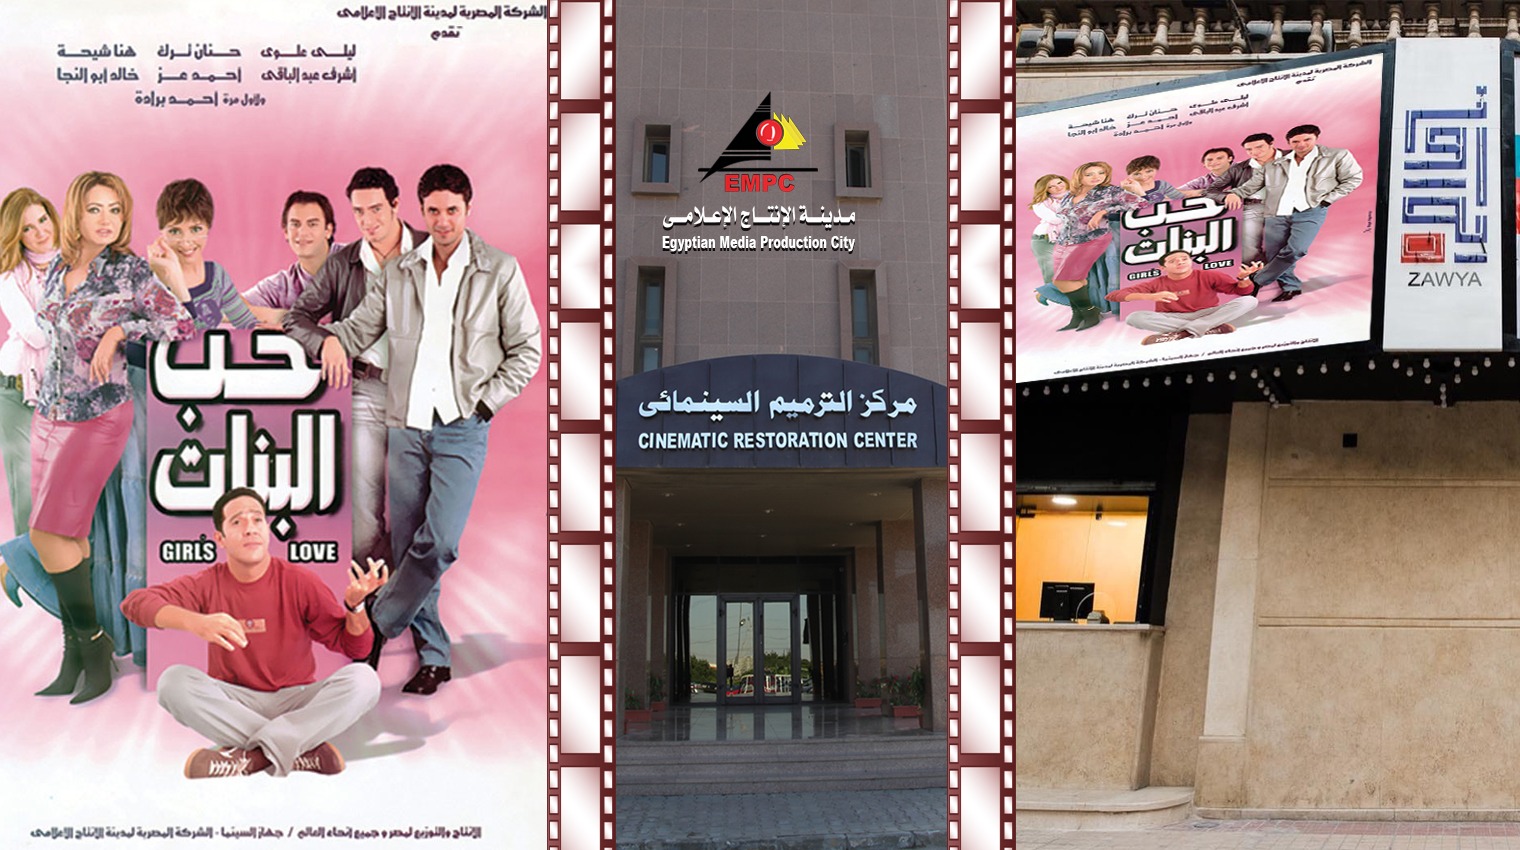 Today, Zawya Cinema is showing the movie “Hob El Banat” after it was restored by media production